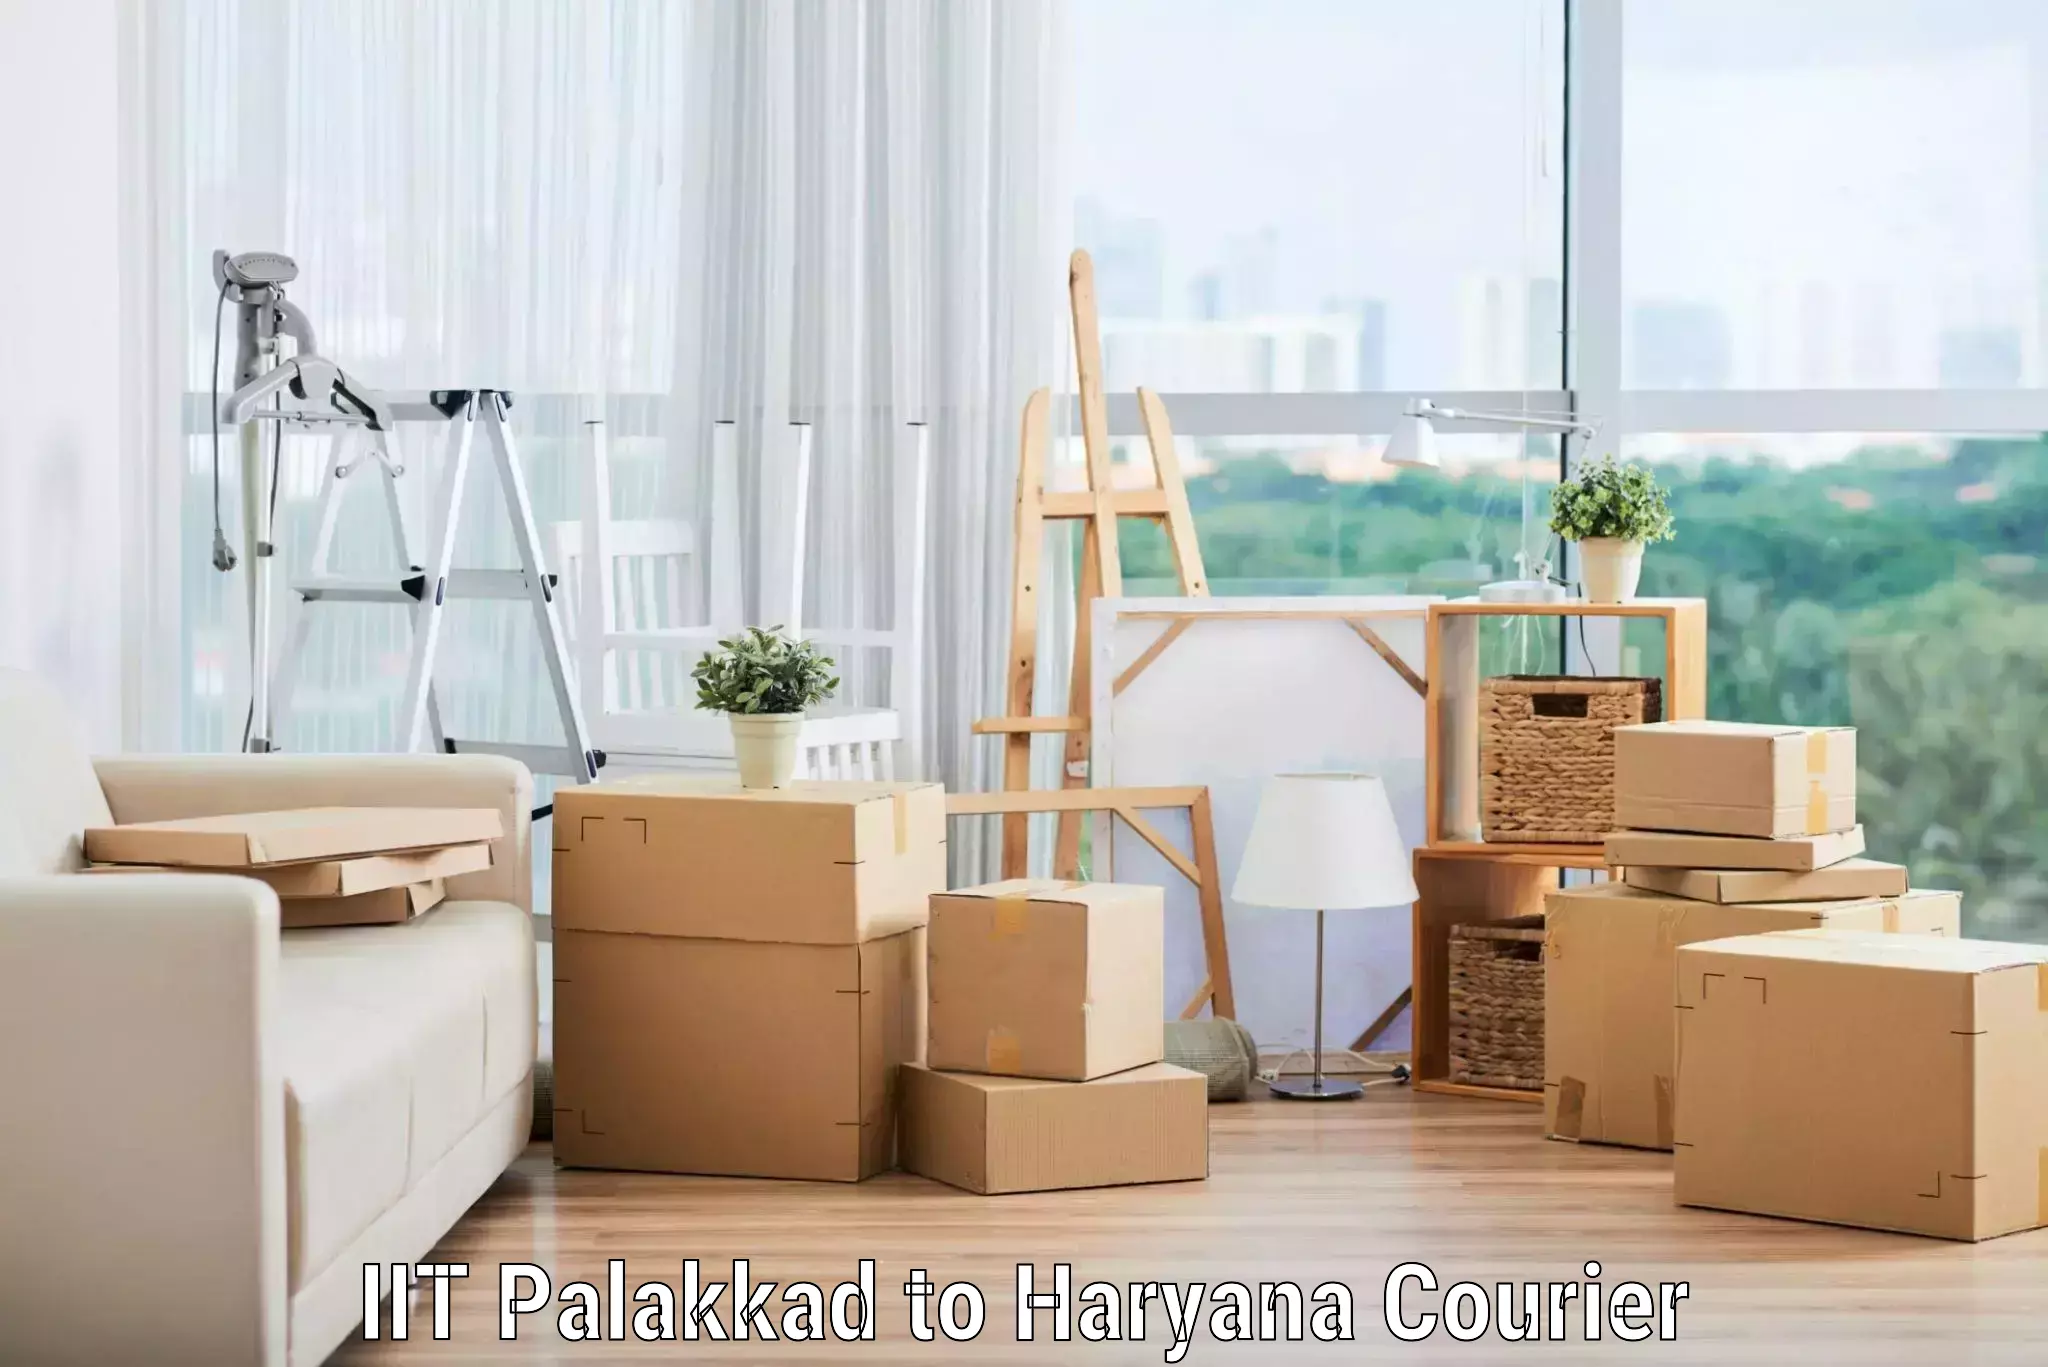 Home goods moving company IIT Palakkad to Pinjore